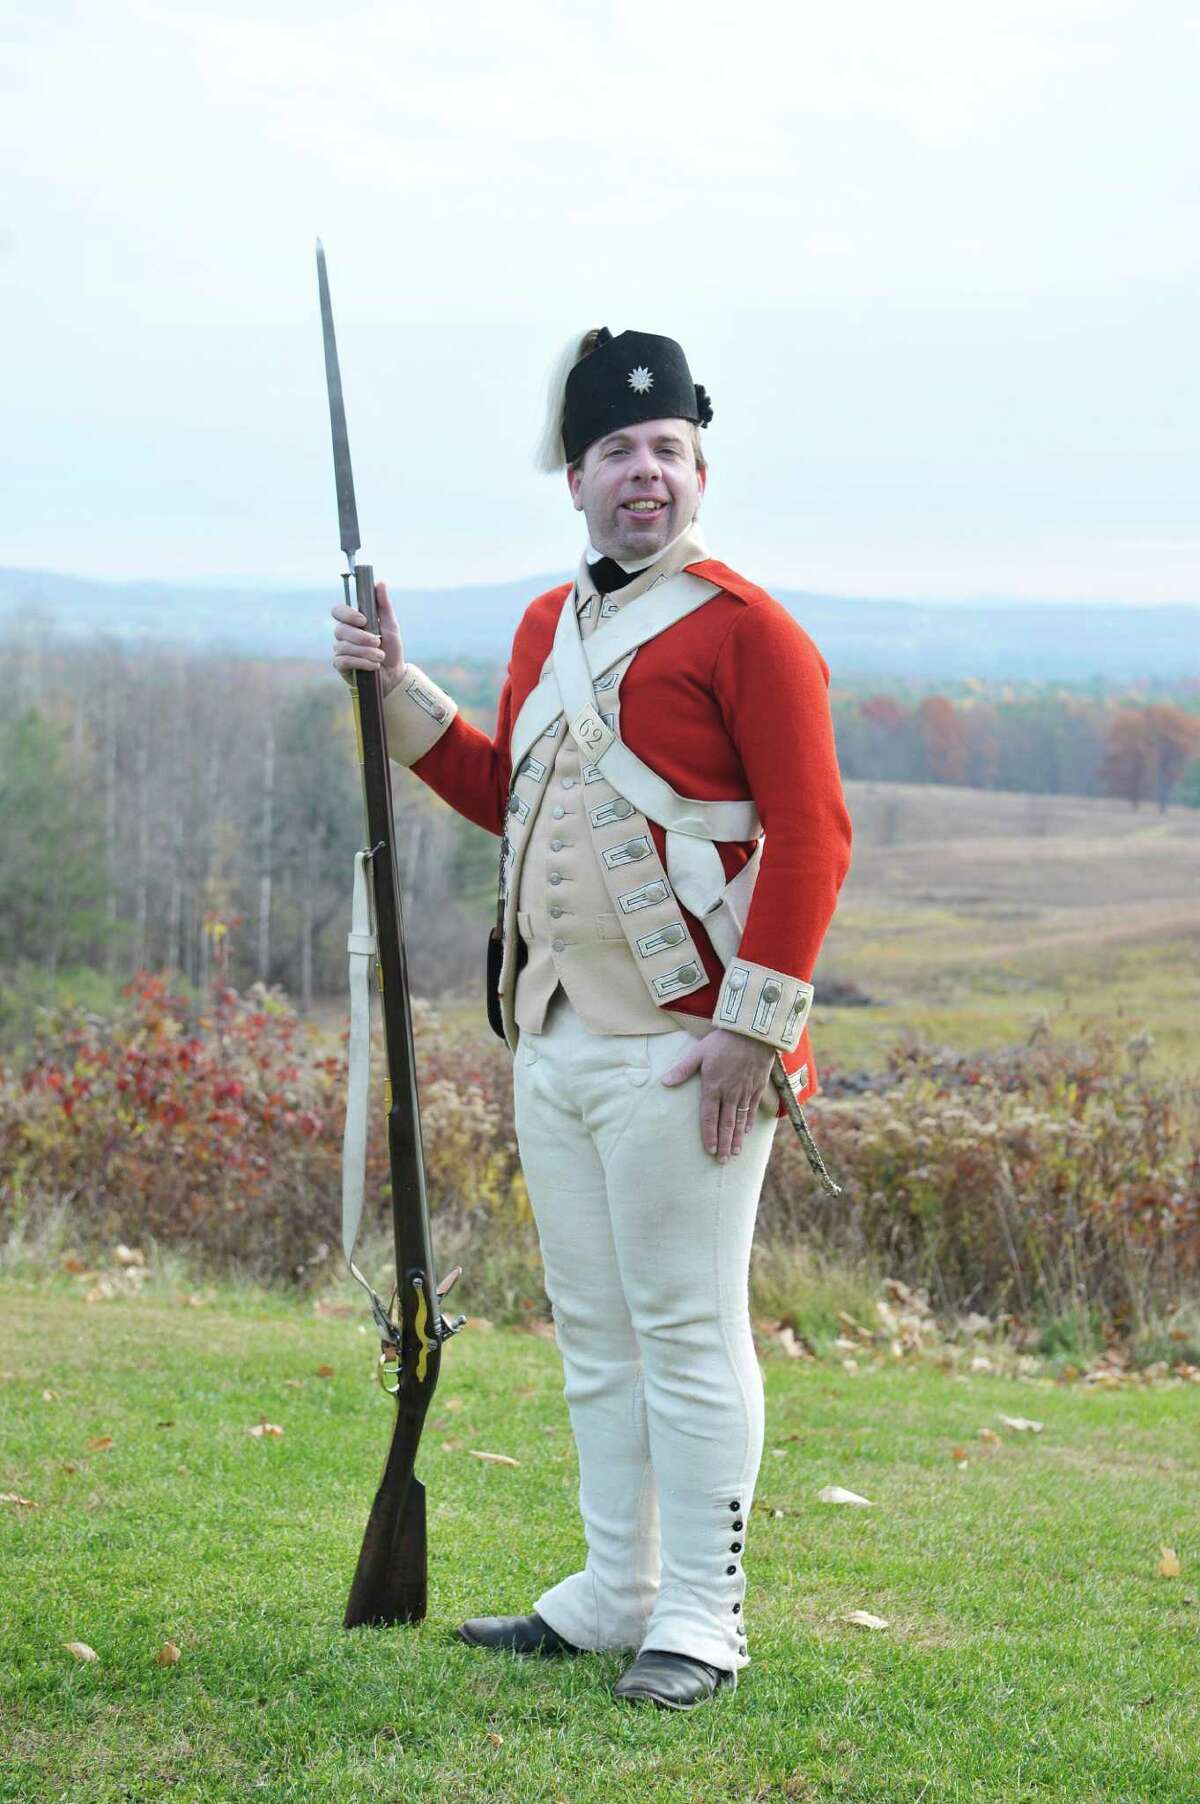 Reinactor Eric Schnitzer, dressed as a private soldier in the British 62nd Regiment in 1777, poses for a photograph at the Saratoga National Historical Park on Monday, Nov. 10, 2014, in Stillwater, N.Y. (Paul Buckowski / Times Union)